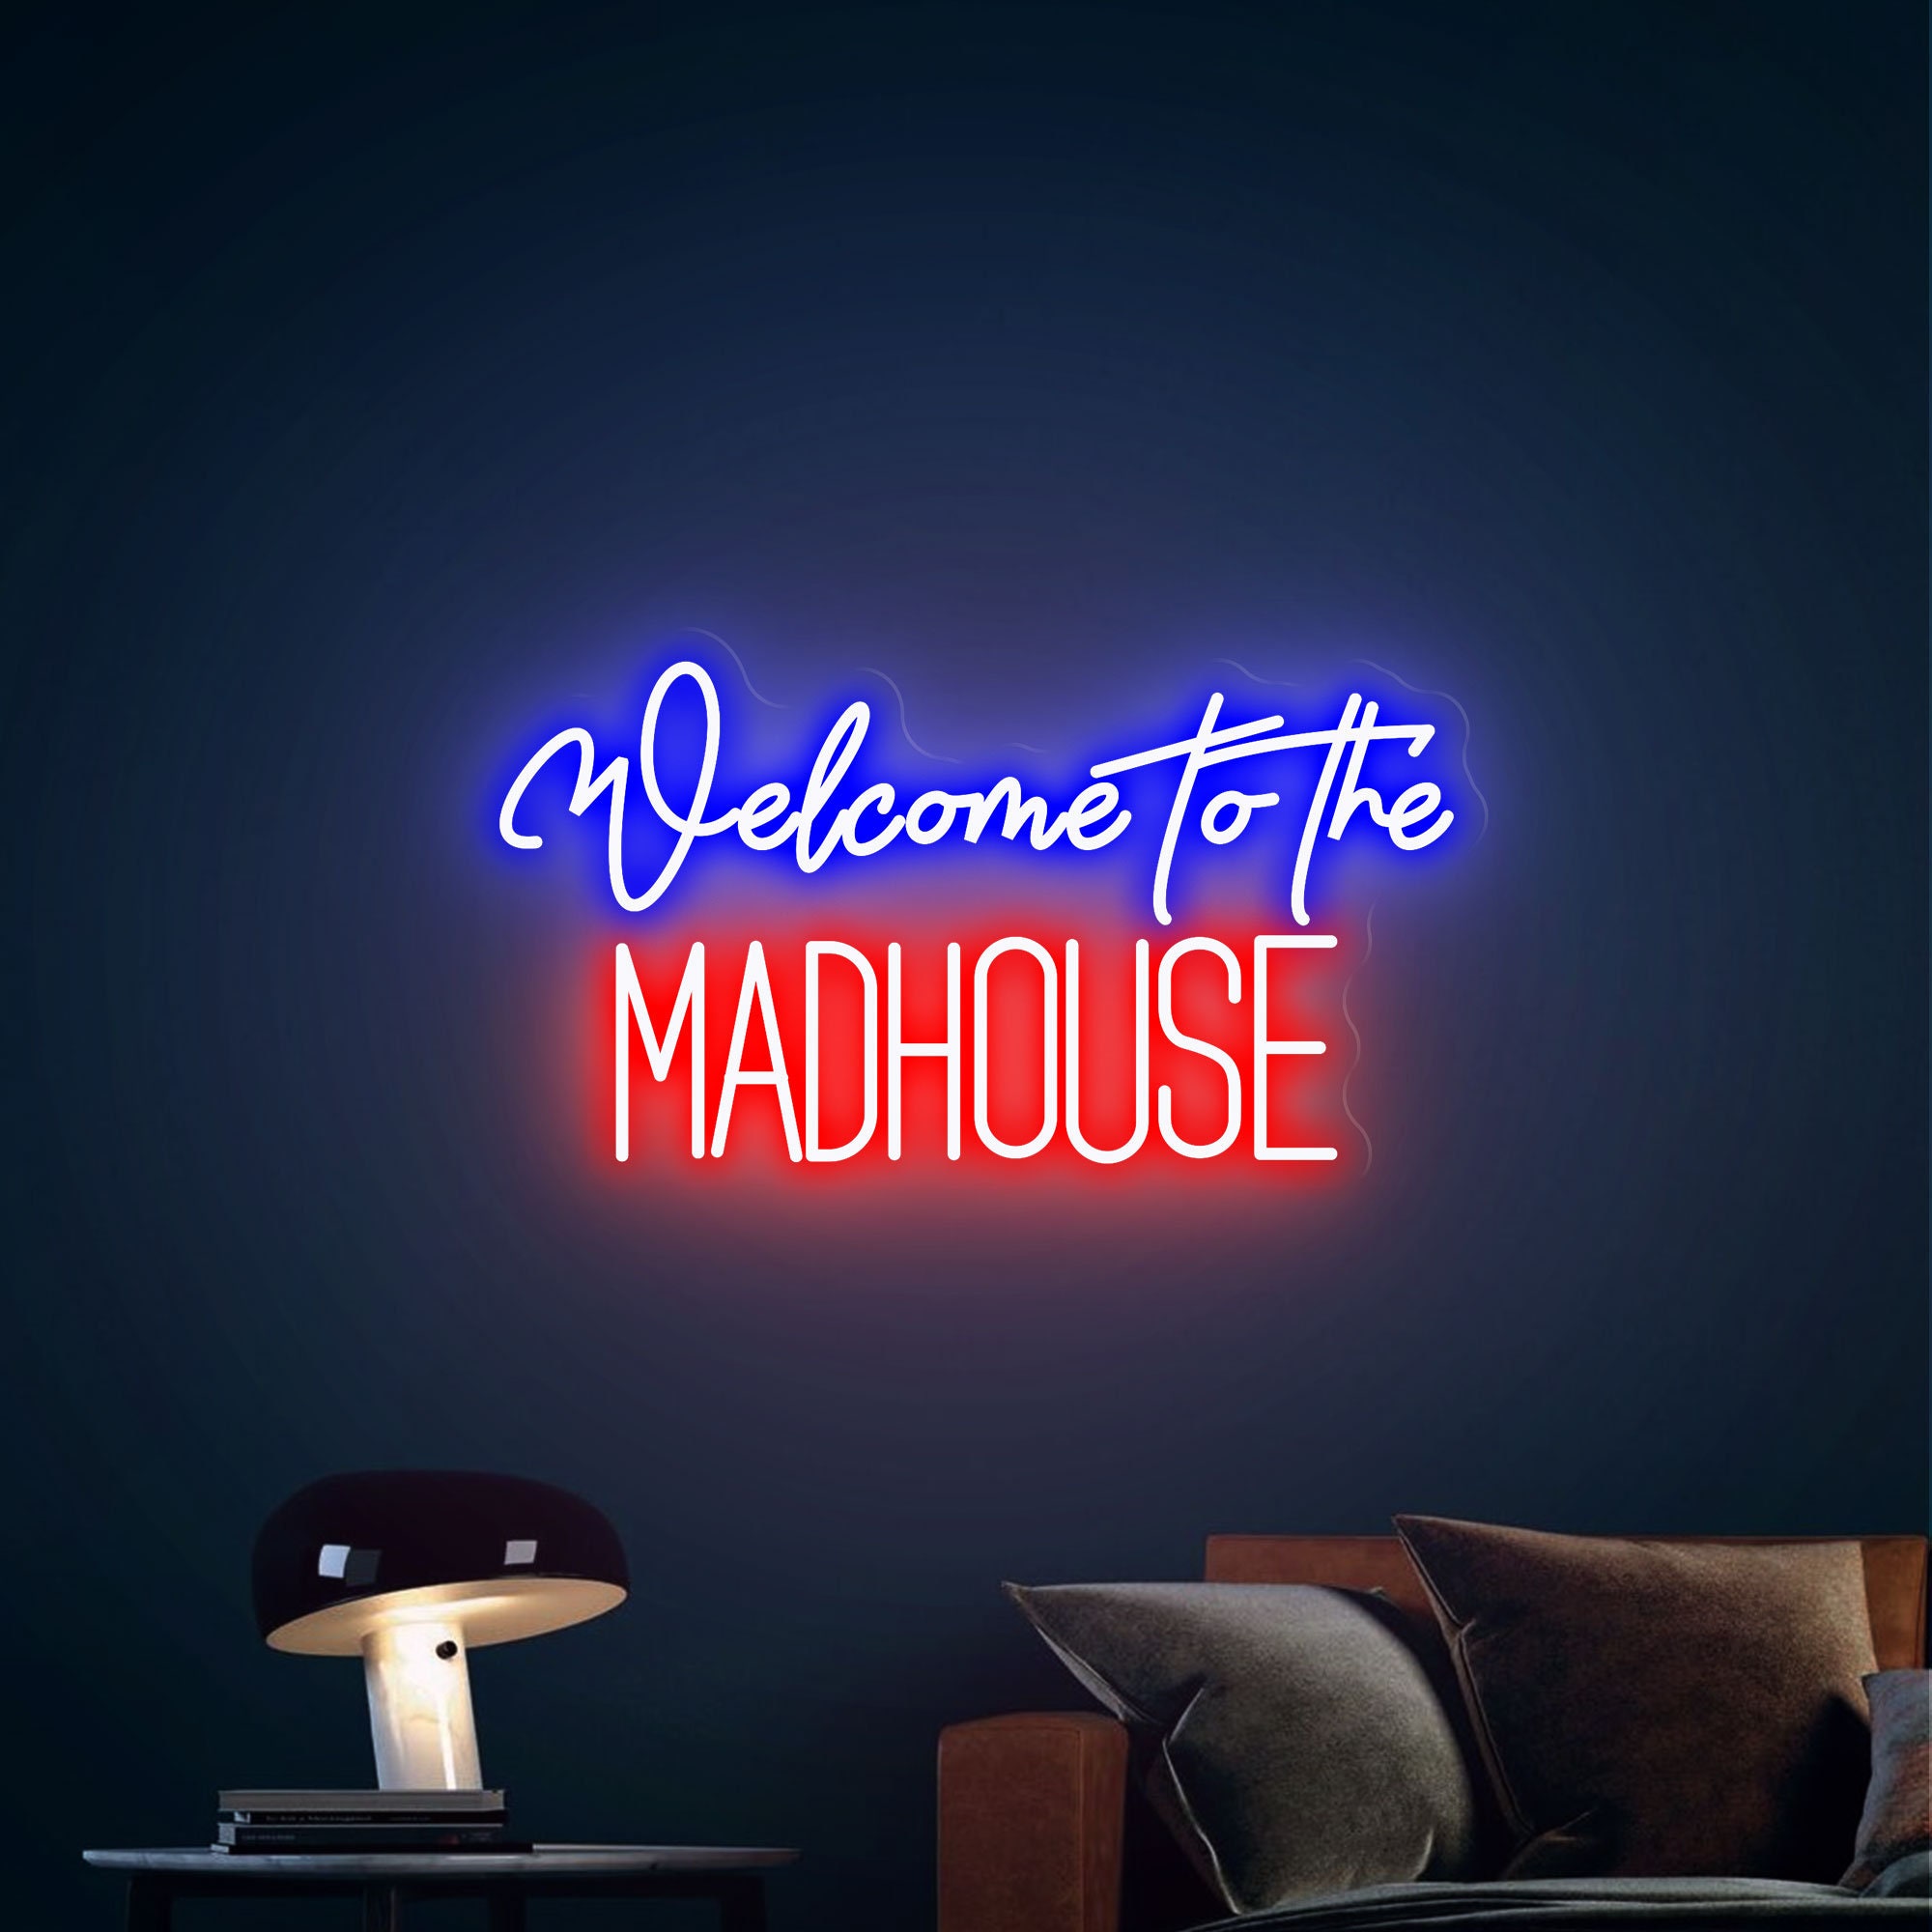 Welcome to the Madhouse Doormat Mad House Mat Coir Floor Door Mat Indoor/outdoor  Doormat Welcome Mat Housewarming Gift 60x40cm 